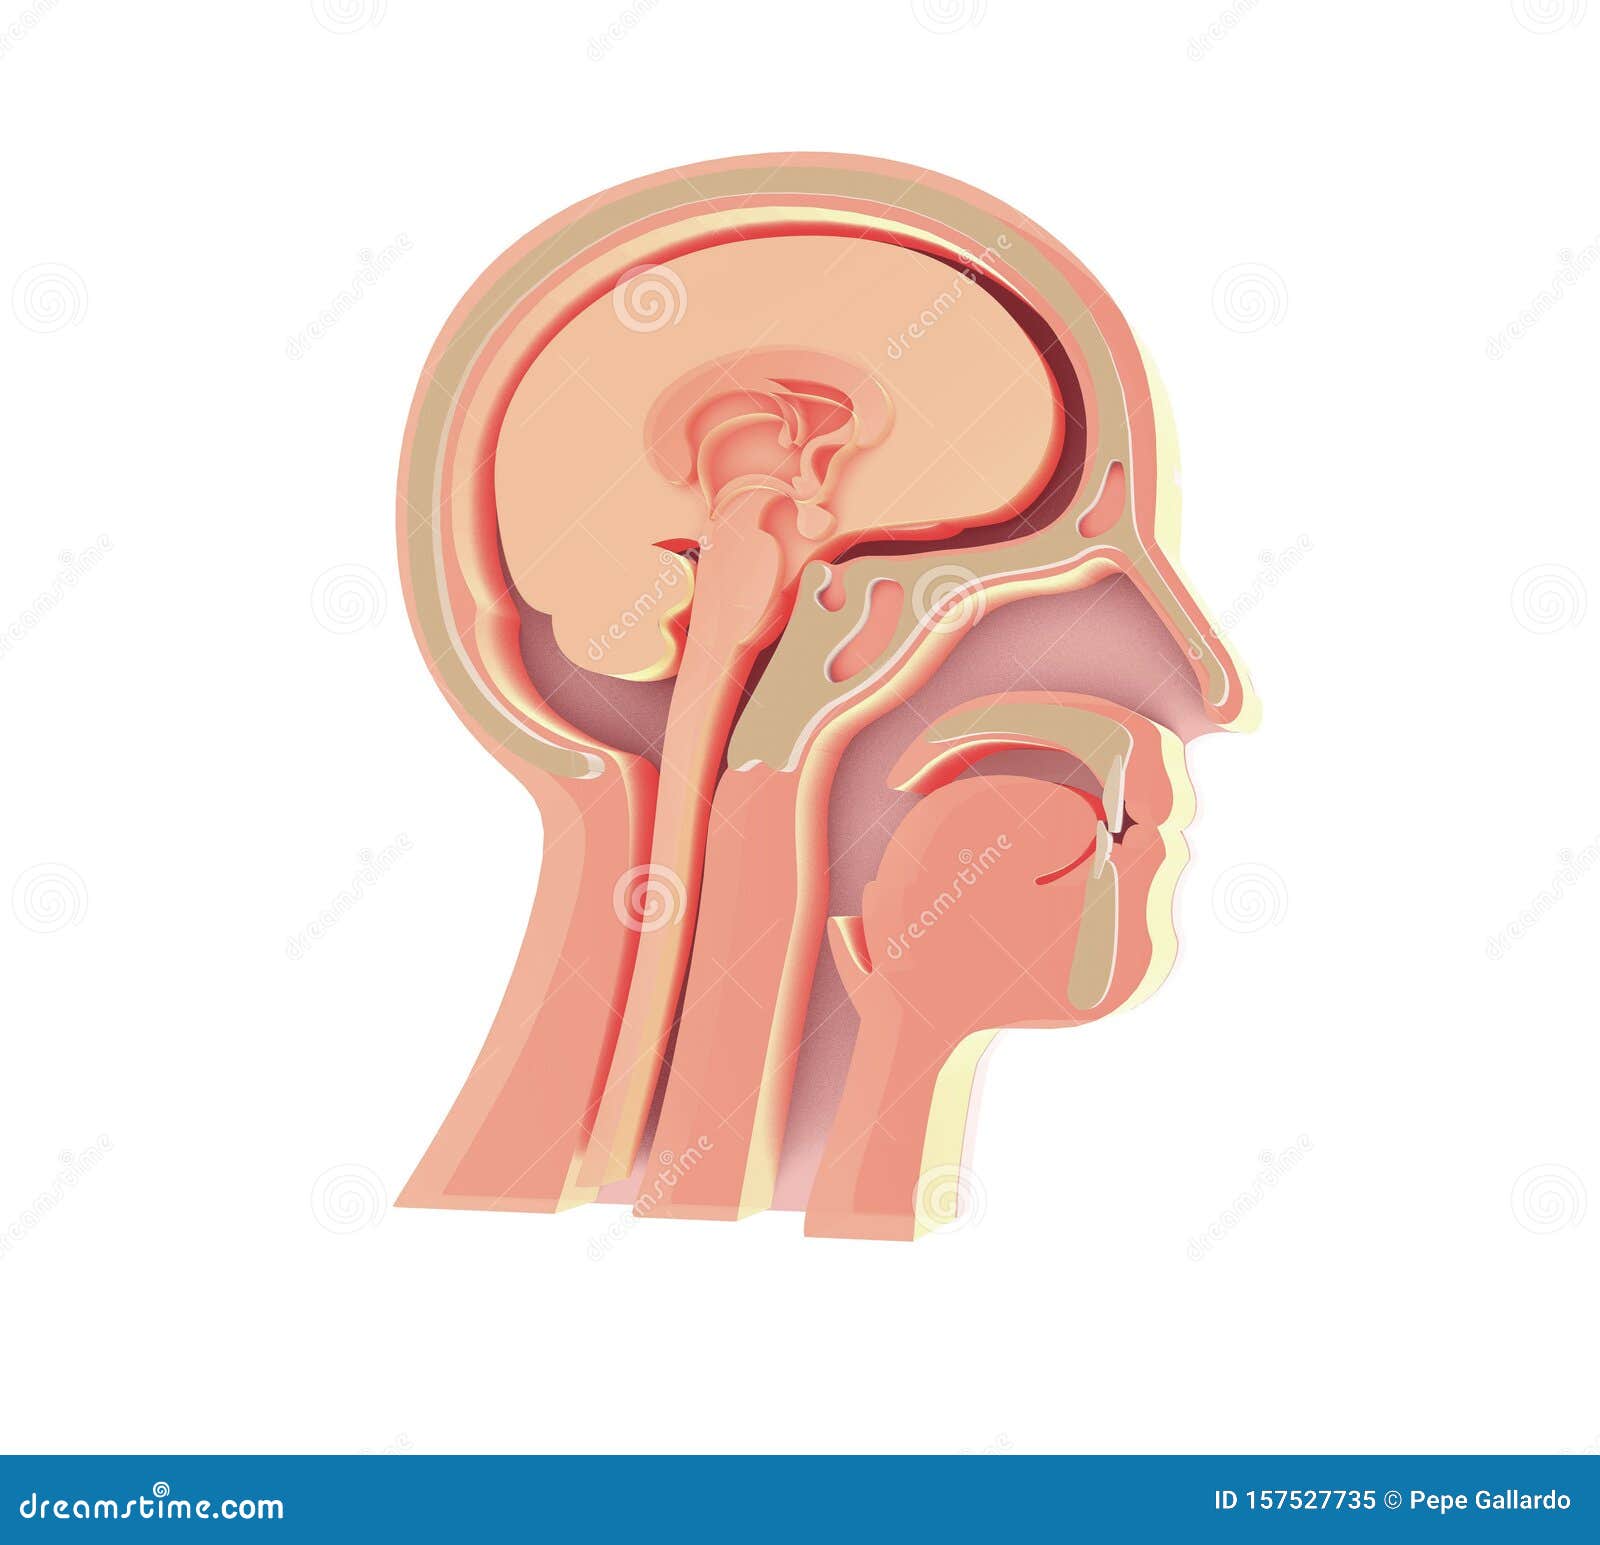 enlarged image 3d of anatomical  of the empty human head.